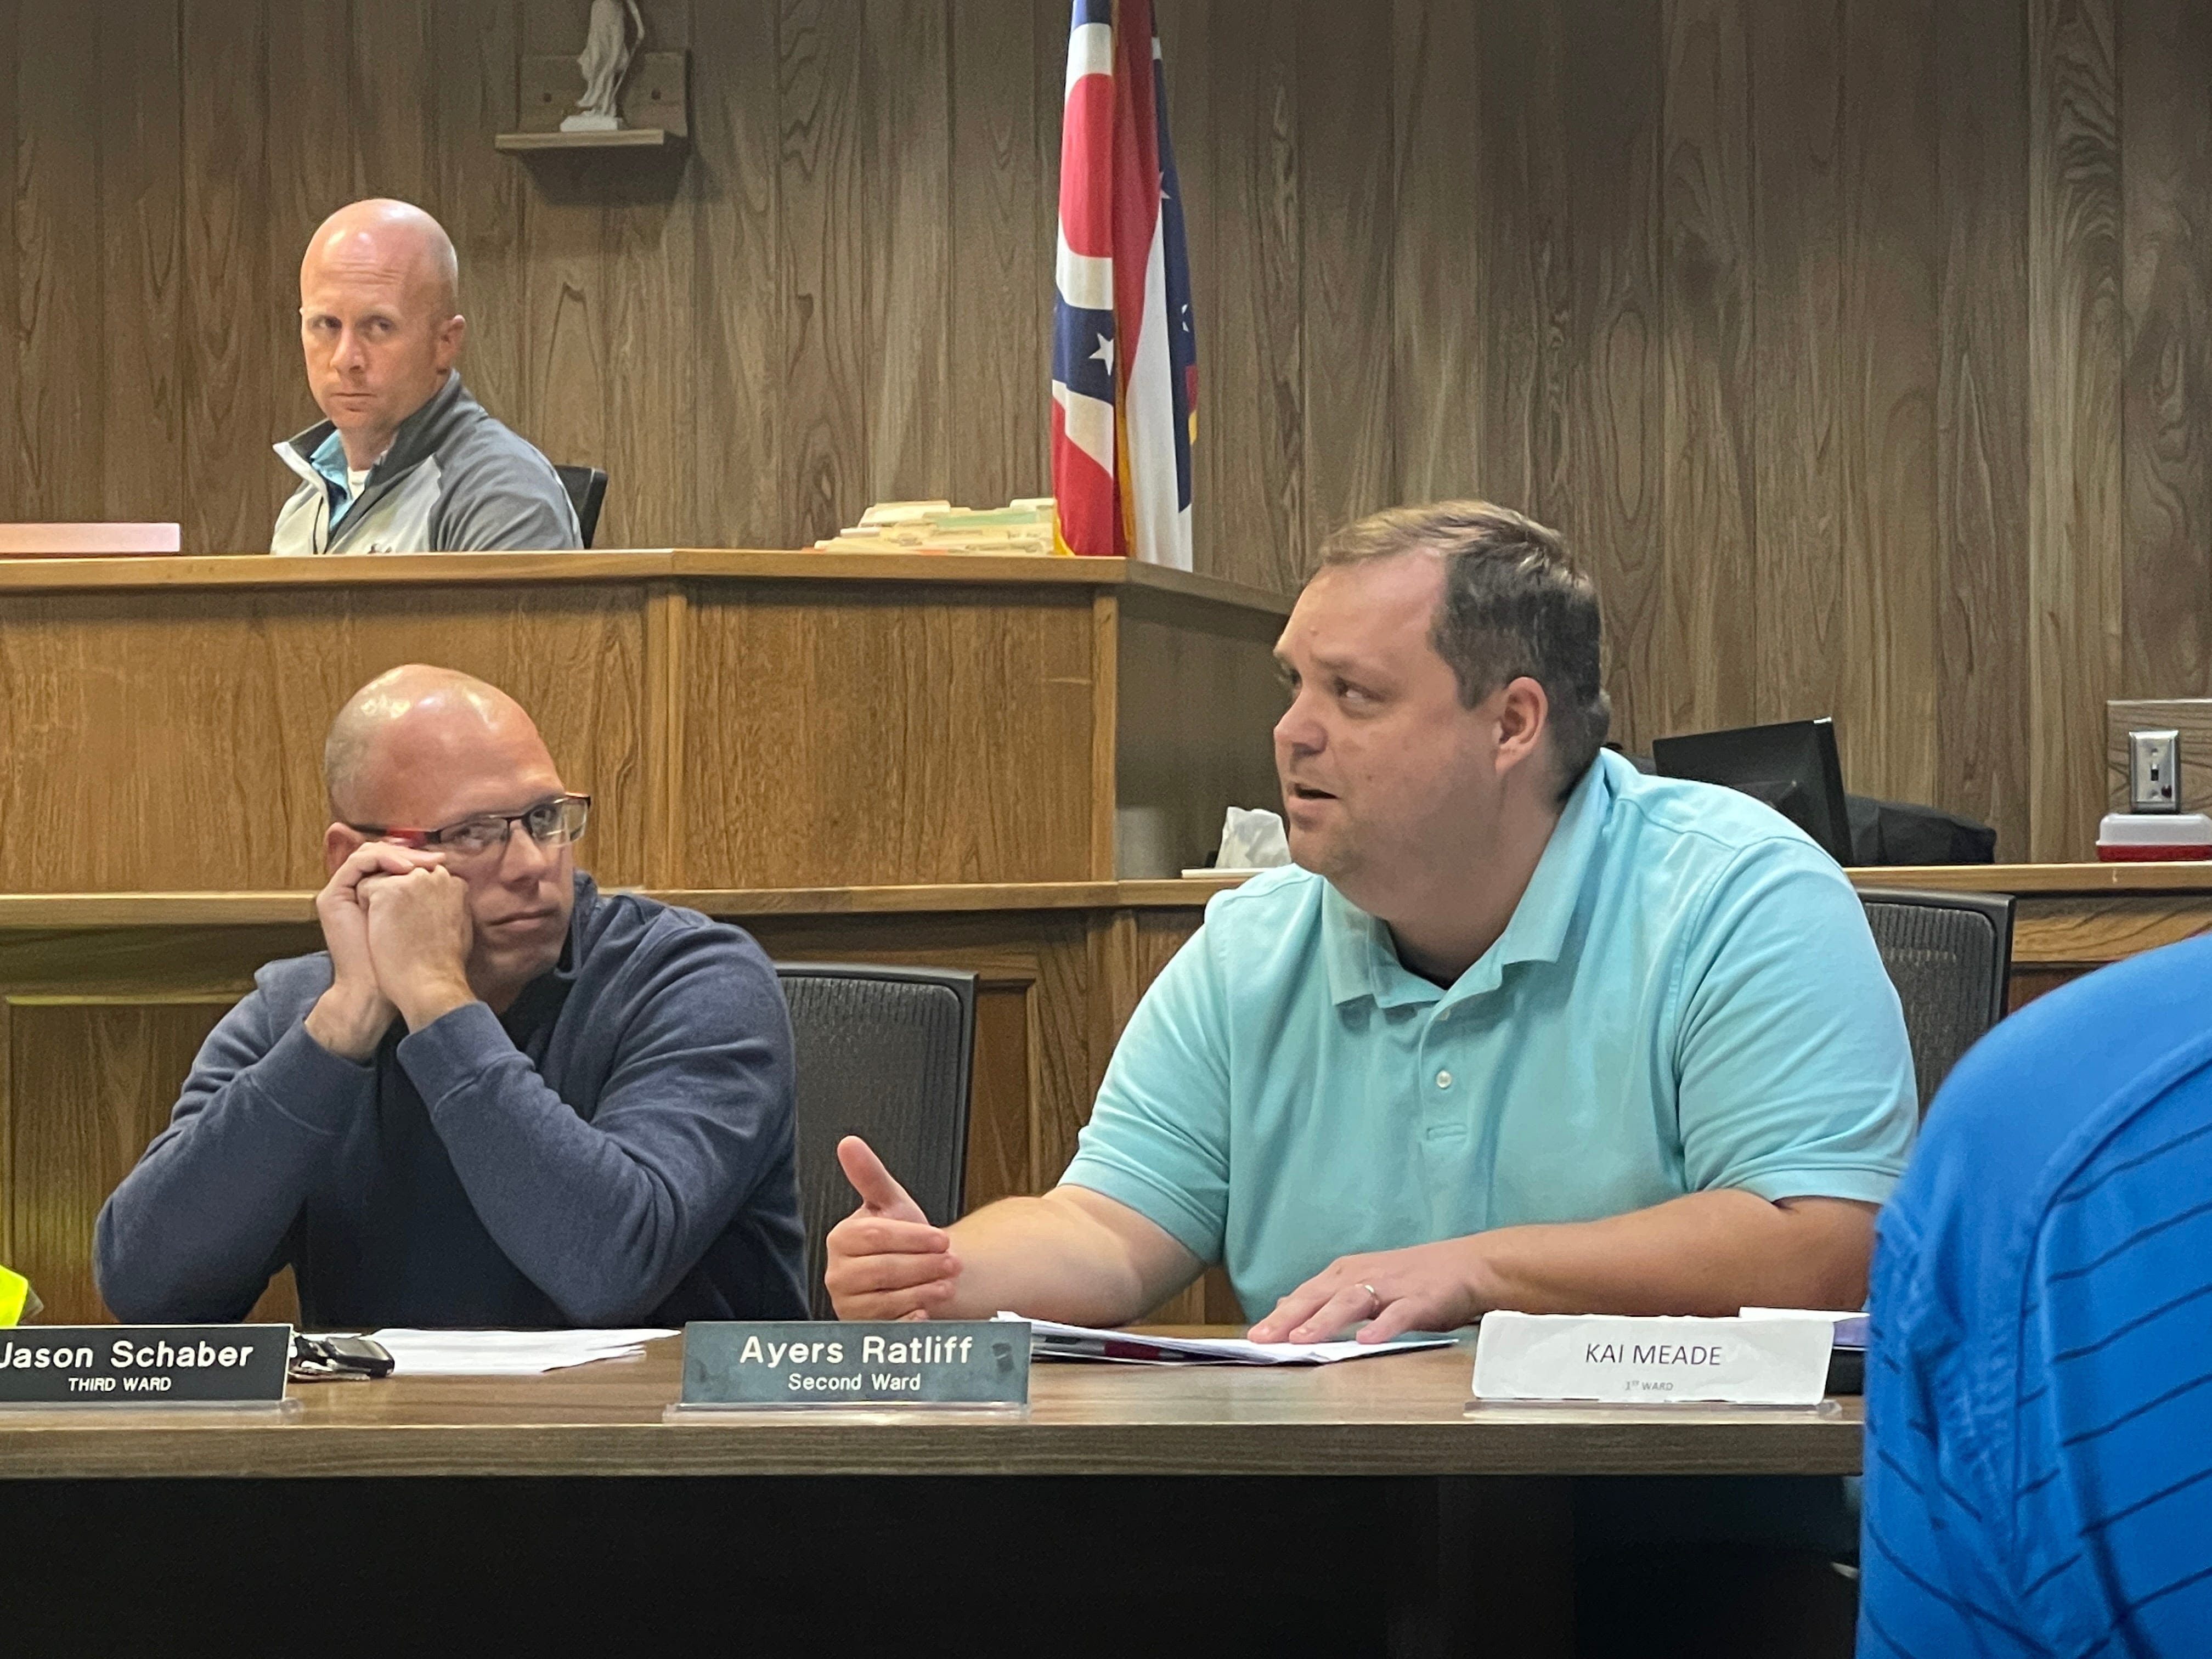 Nurse: Sexual assault exam of girl 'consistent' with rape charge against Marion councilman